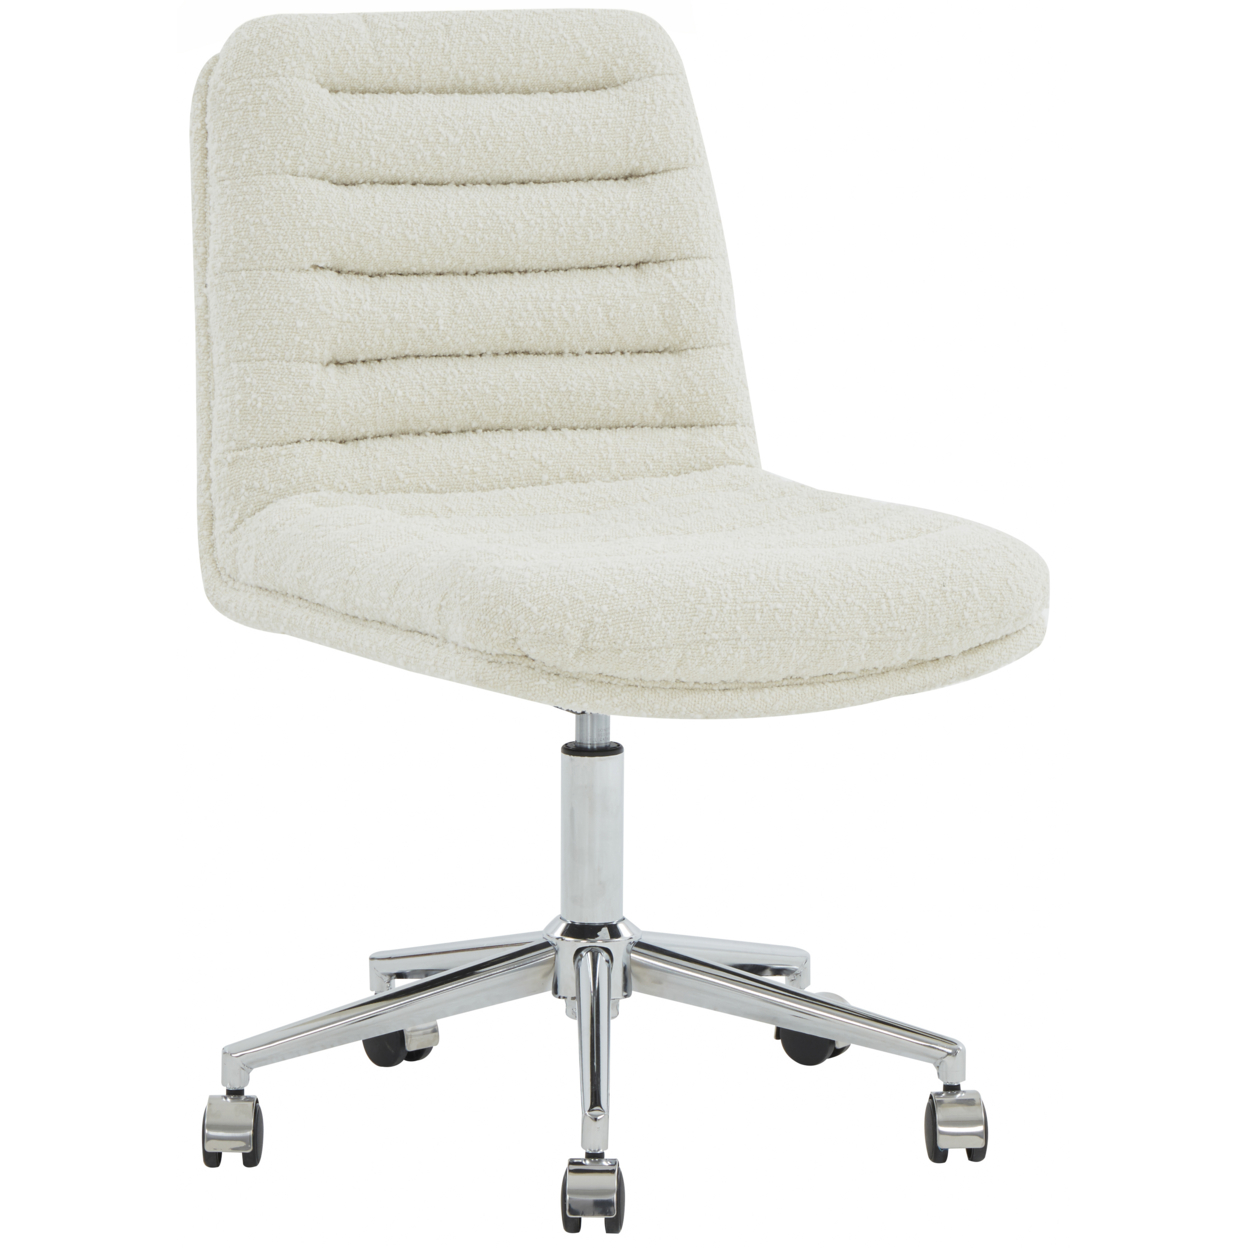 SAFAVIEH COUTURE DECOLIN SWIVEL DESK CHAIR Ivory / Silver